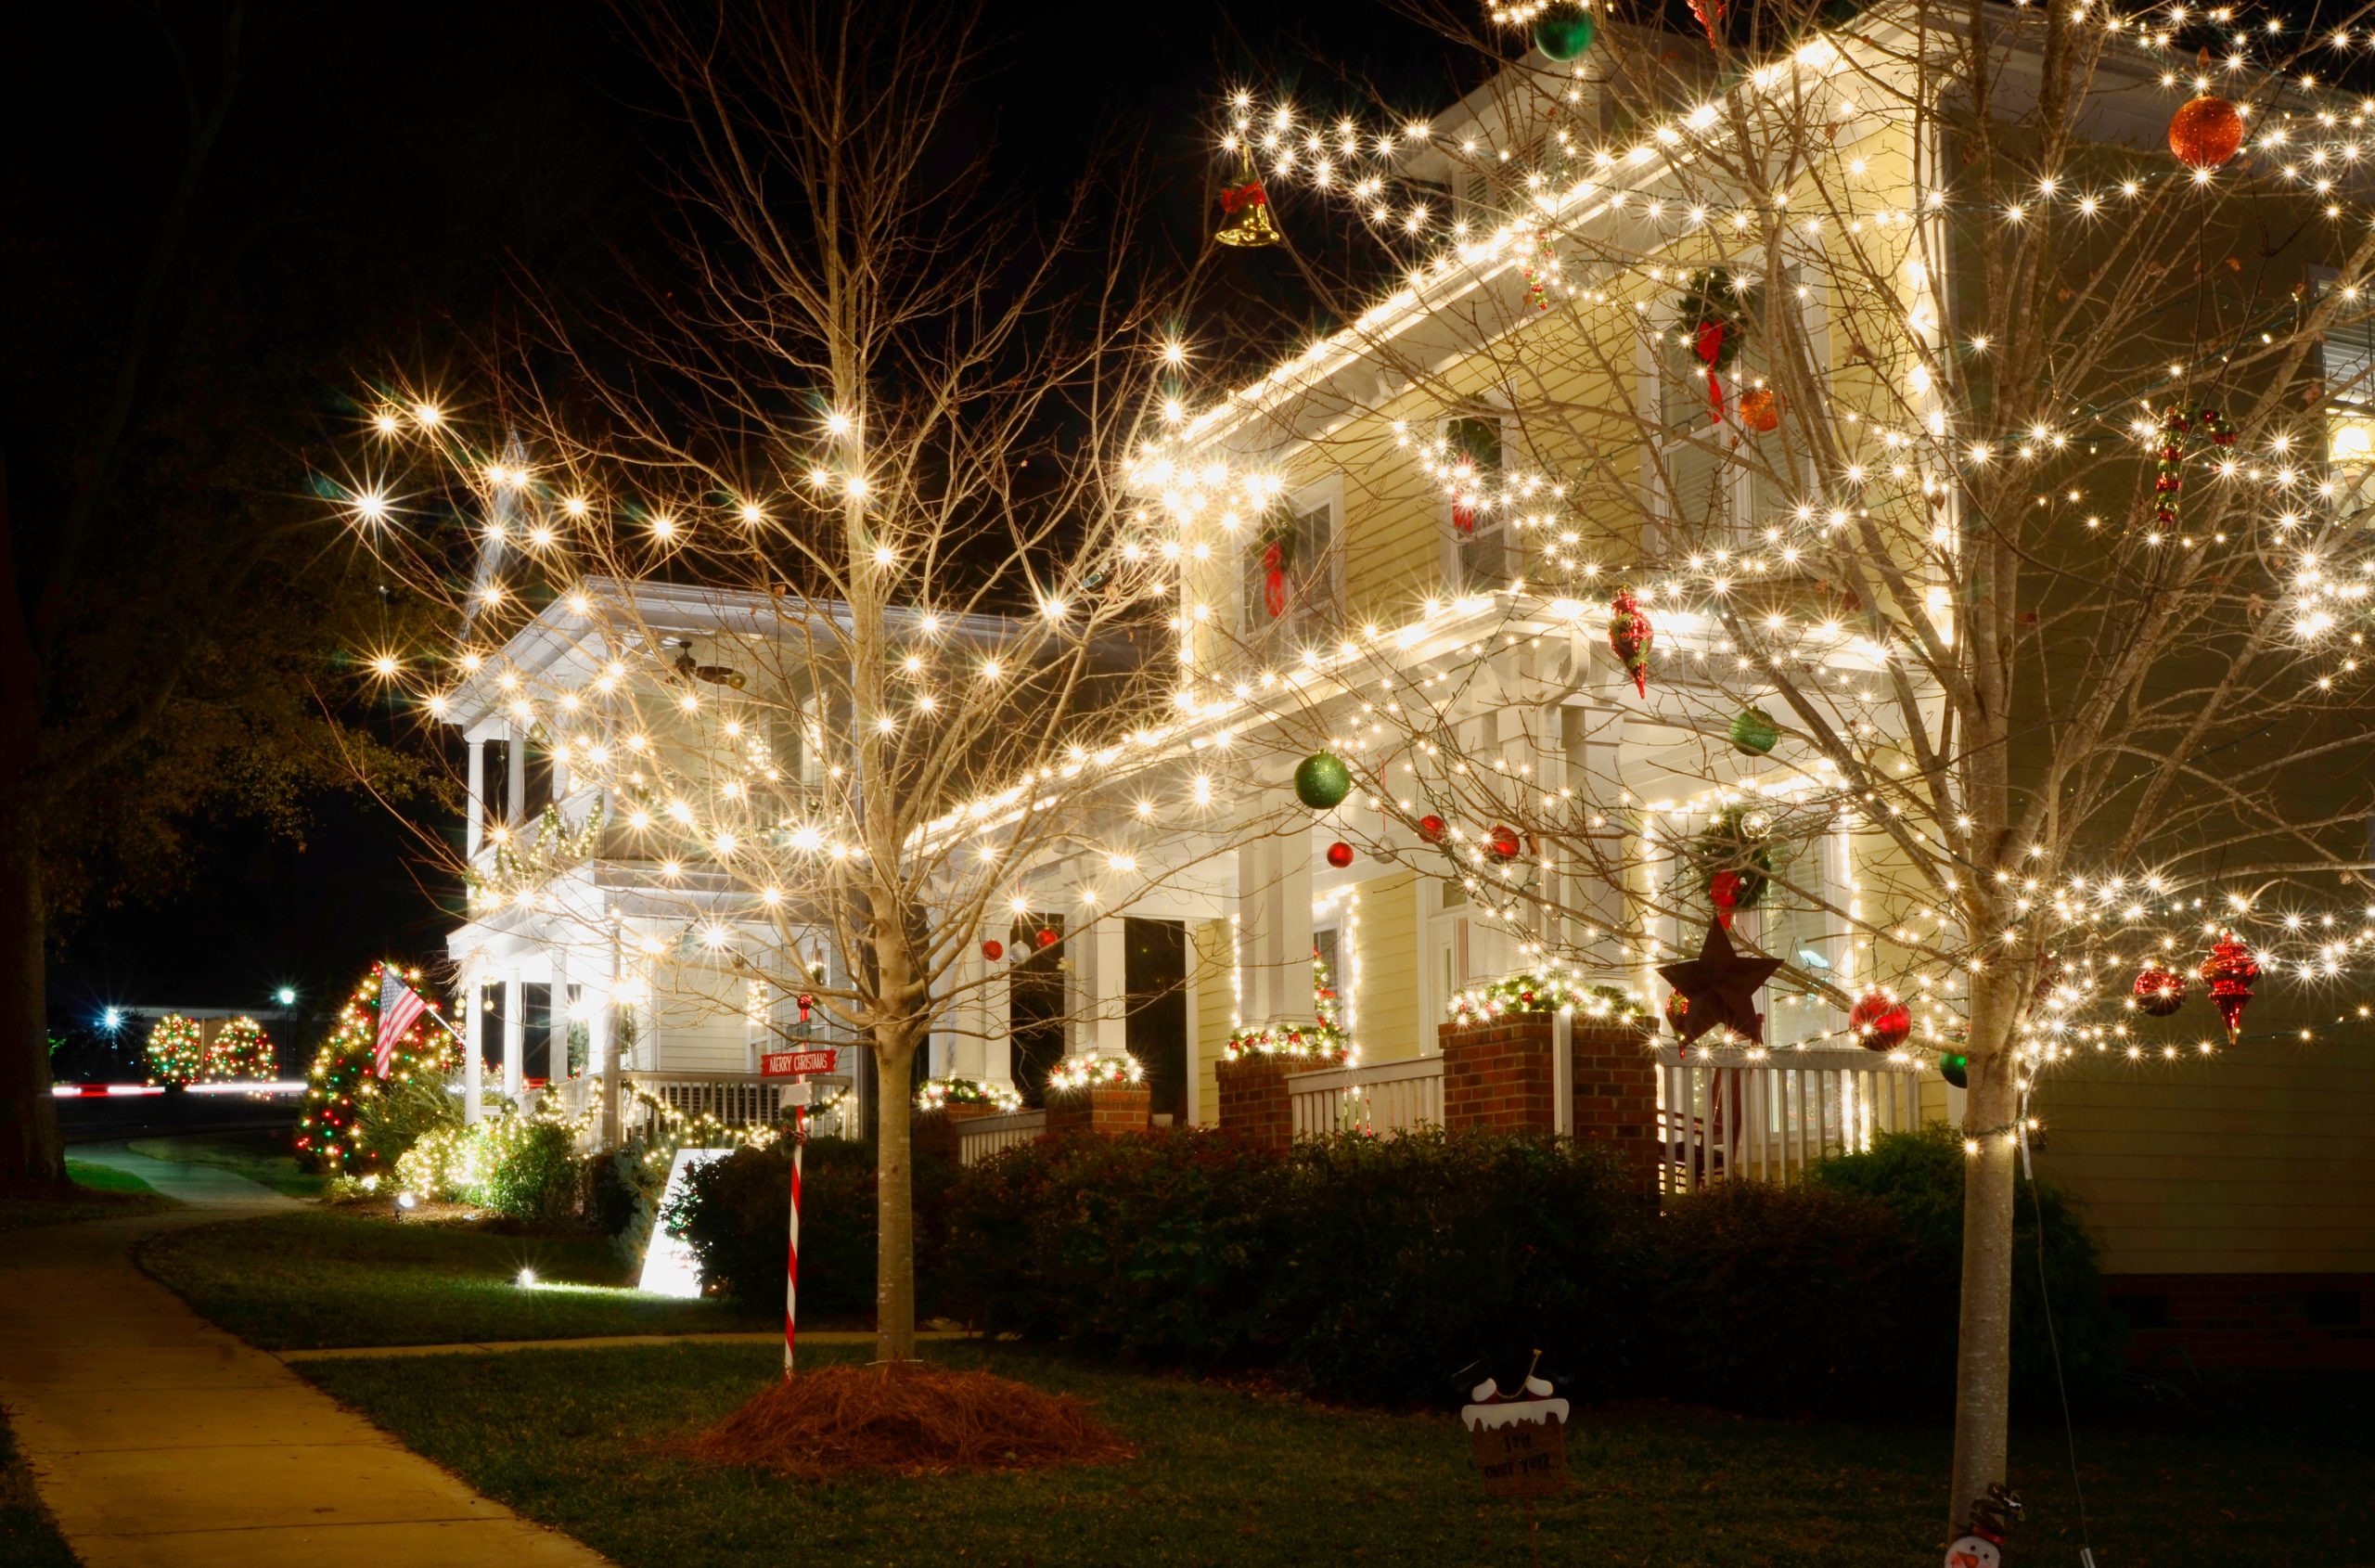 8 outdoor Christmas lights you should consider to add cheer to your home in the new year